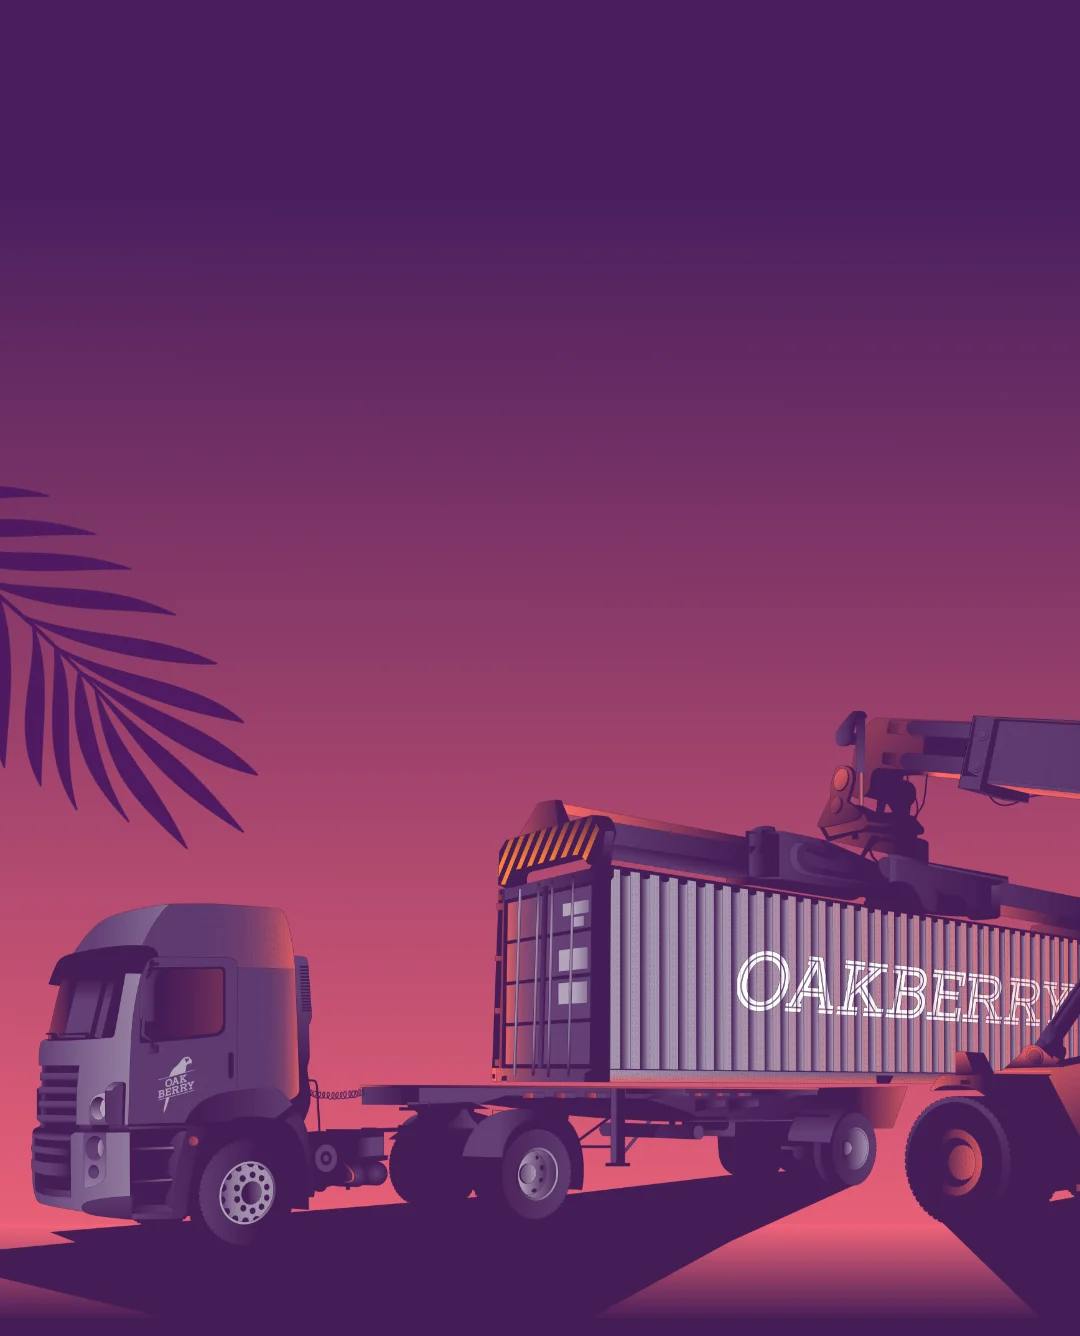 A truck being loaded with an OAKBERRY açaí trailer